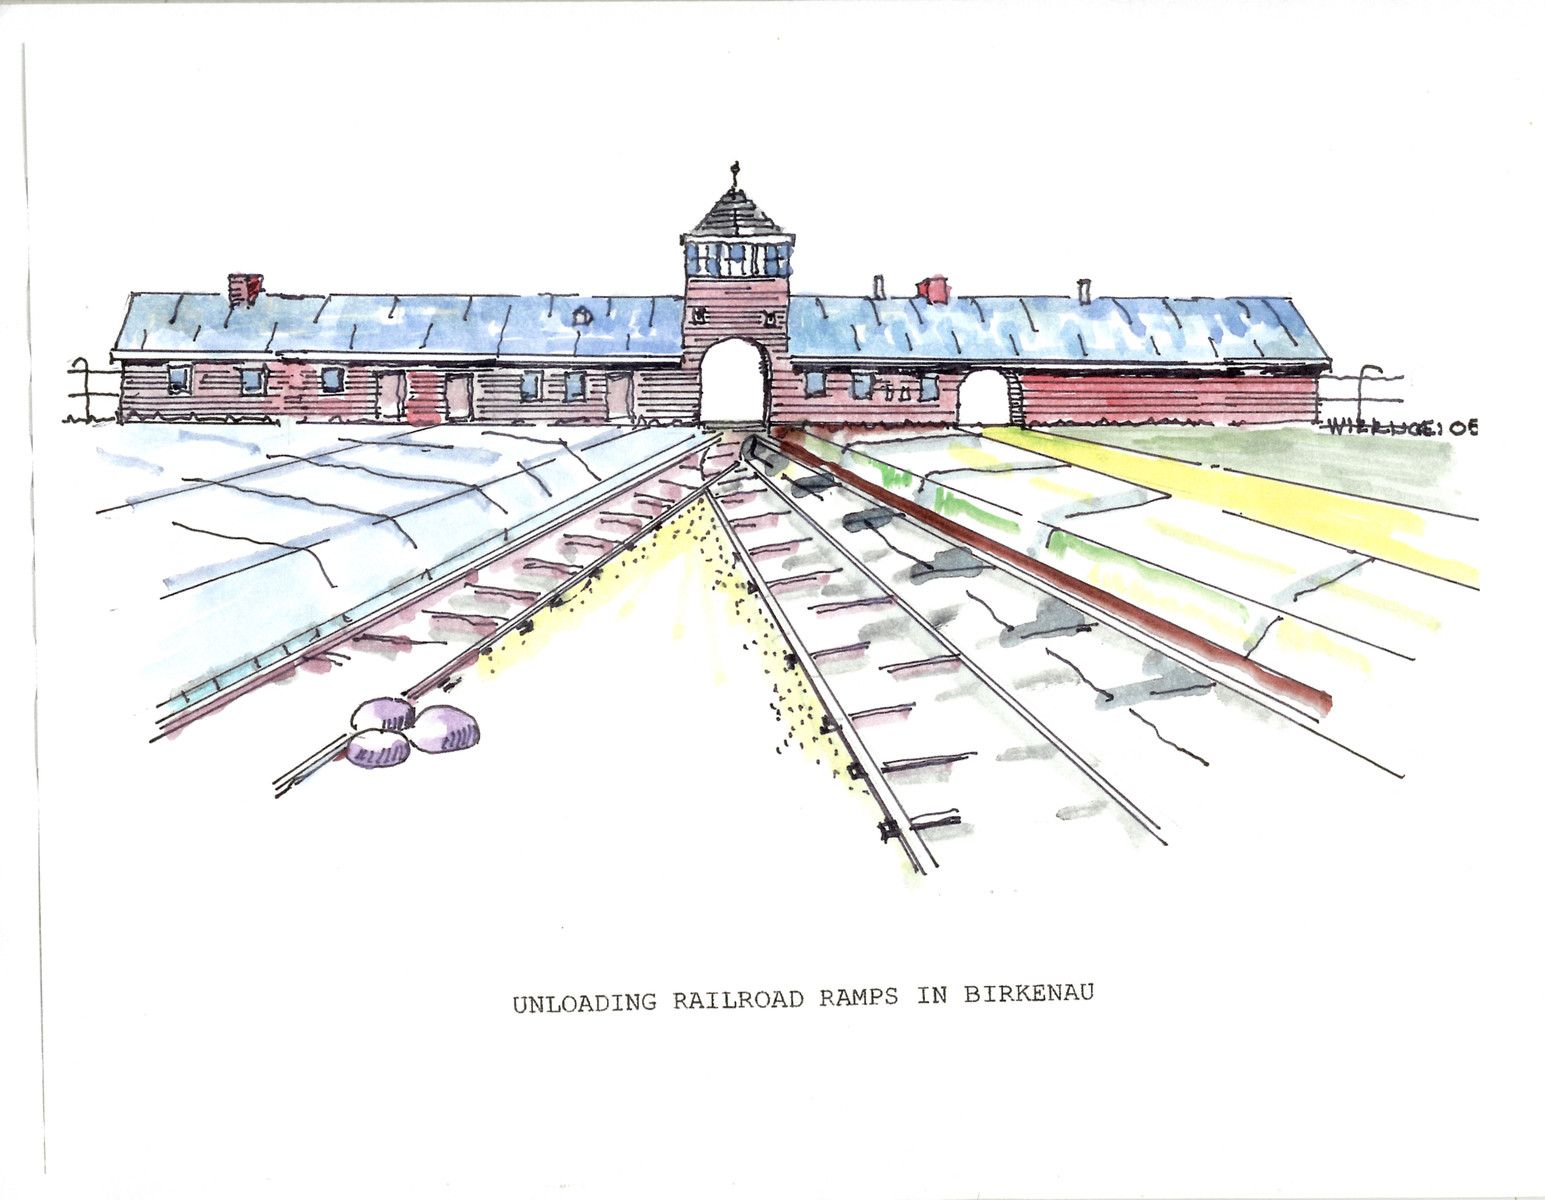 A watercolor and ink drawing from the pictorial memoire entitled,  "Images from Auschwitz-Birkenau, by John Wiernicki, Polish Resistance Fighter, Prisoner Number P150302."

The caption under the drawing reads, "Unloading railroad ramps in Birkenau."